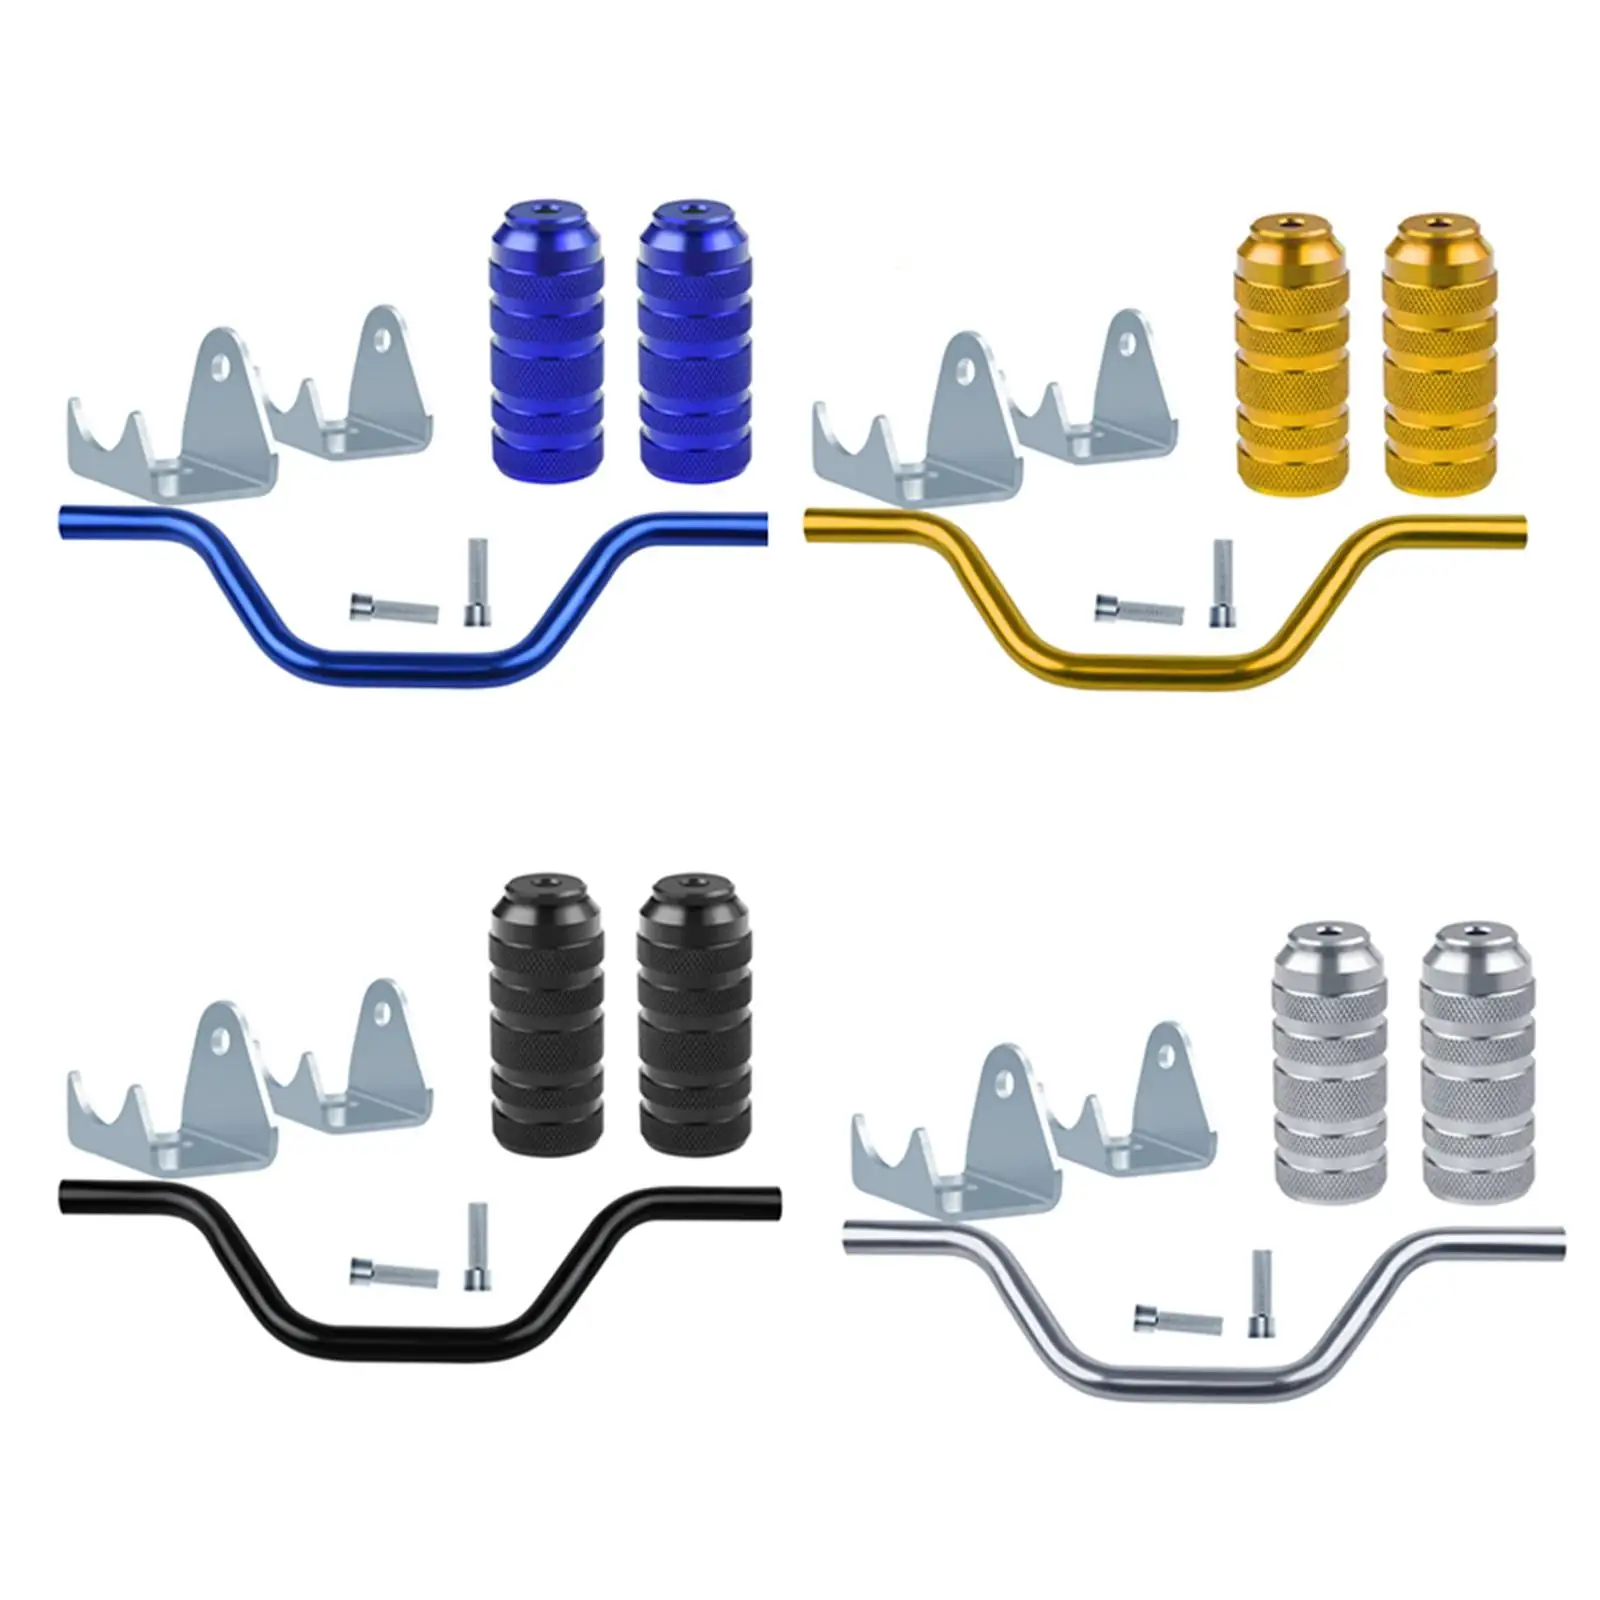 Universal Motorcycle Foot Pegs Pedals Replace Elbow Pedal Lever CNC Foot Rests Footpegs Fit for ATV UTV Moped Scooter Dirt Bike